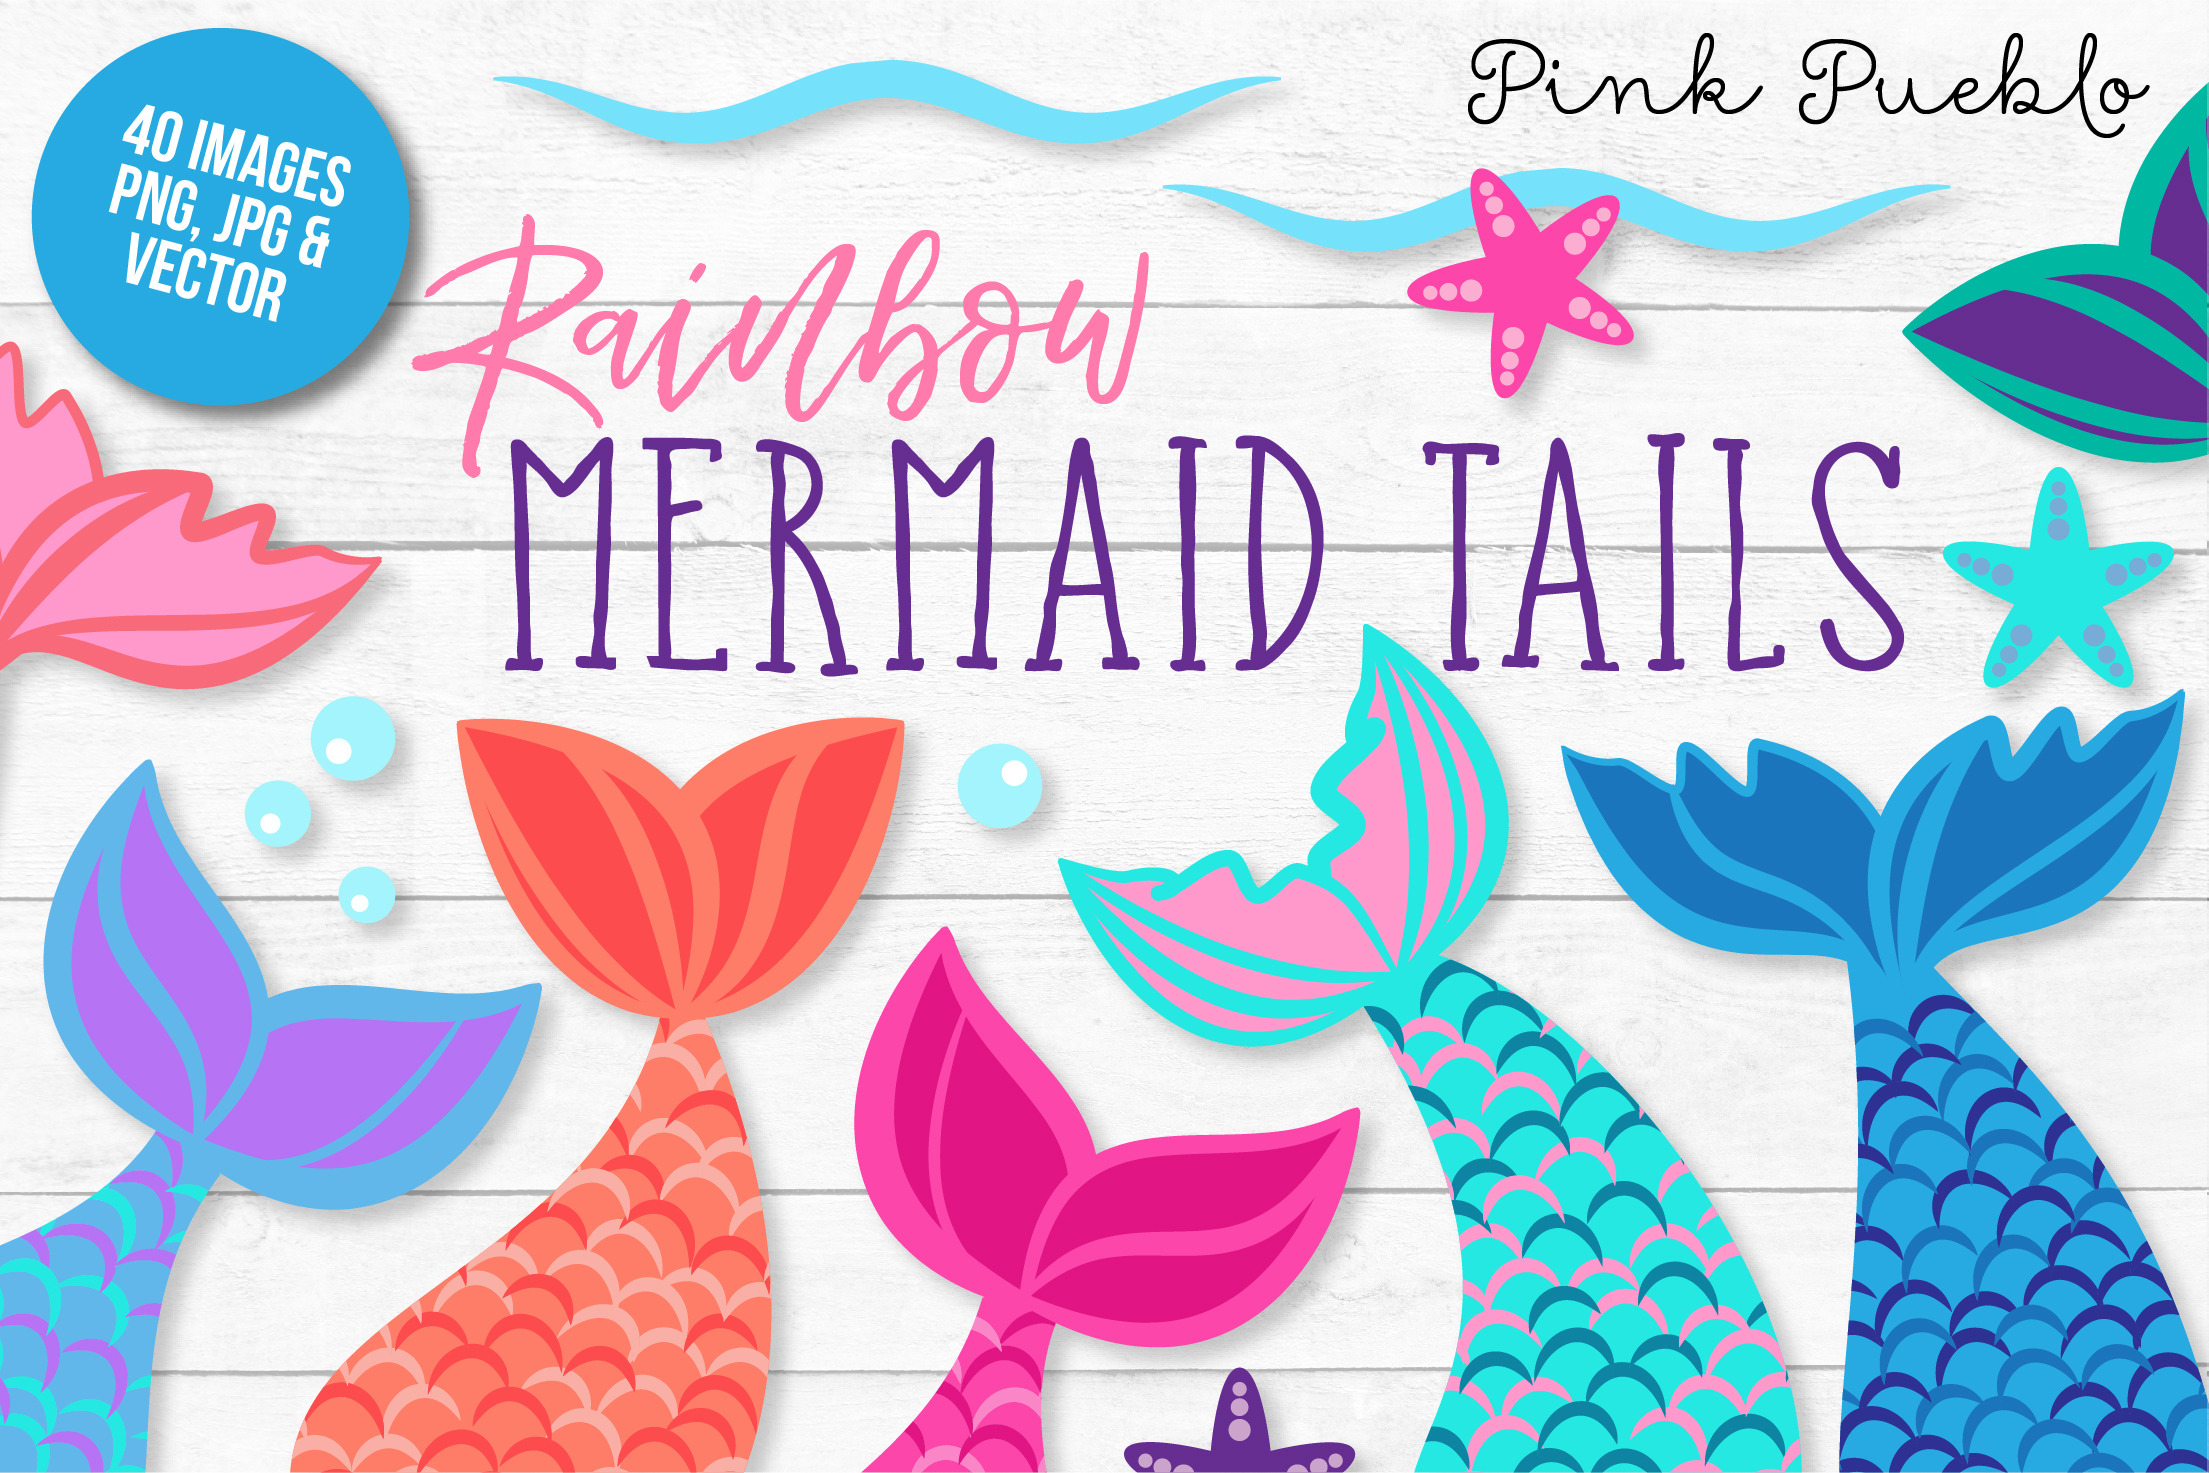 Mermaid Tail Clipart and Vectors ~ Illustrations ...